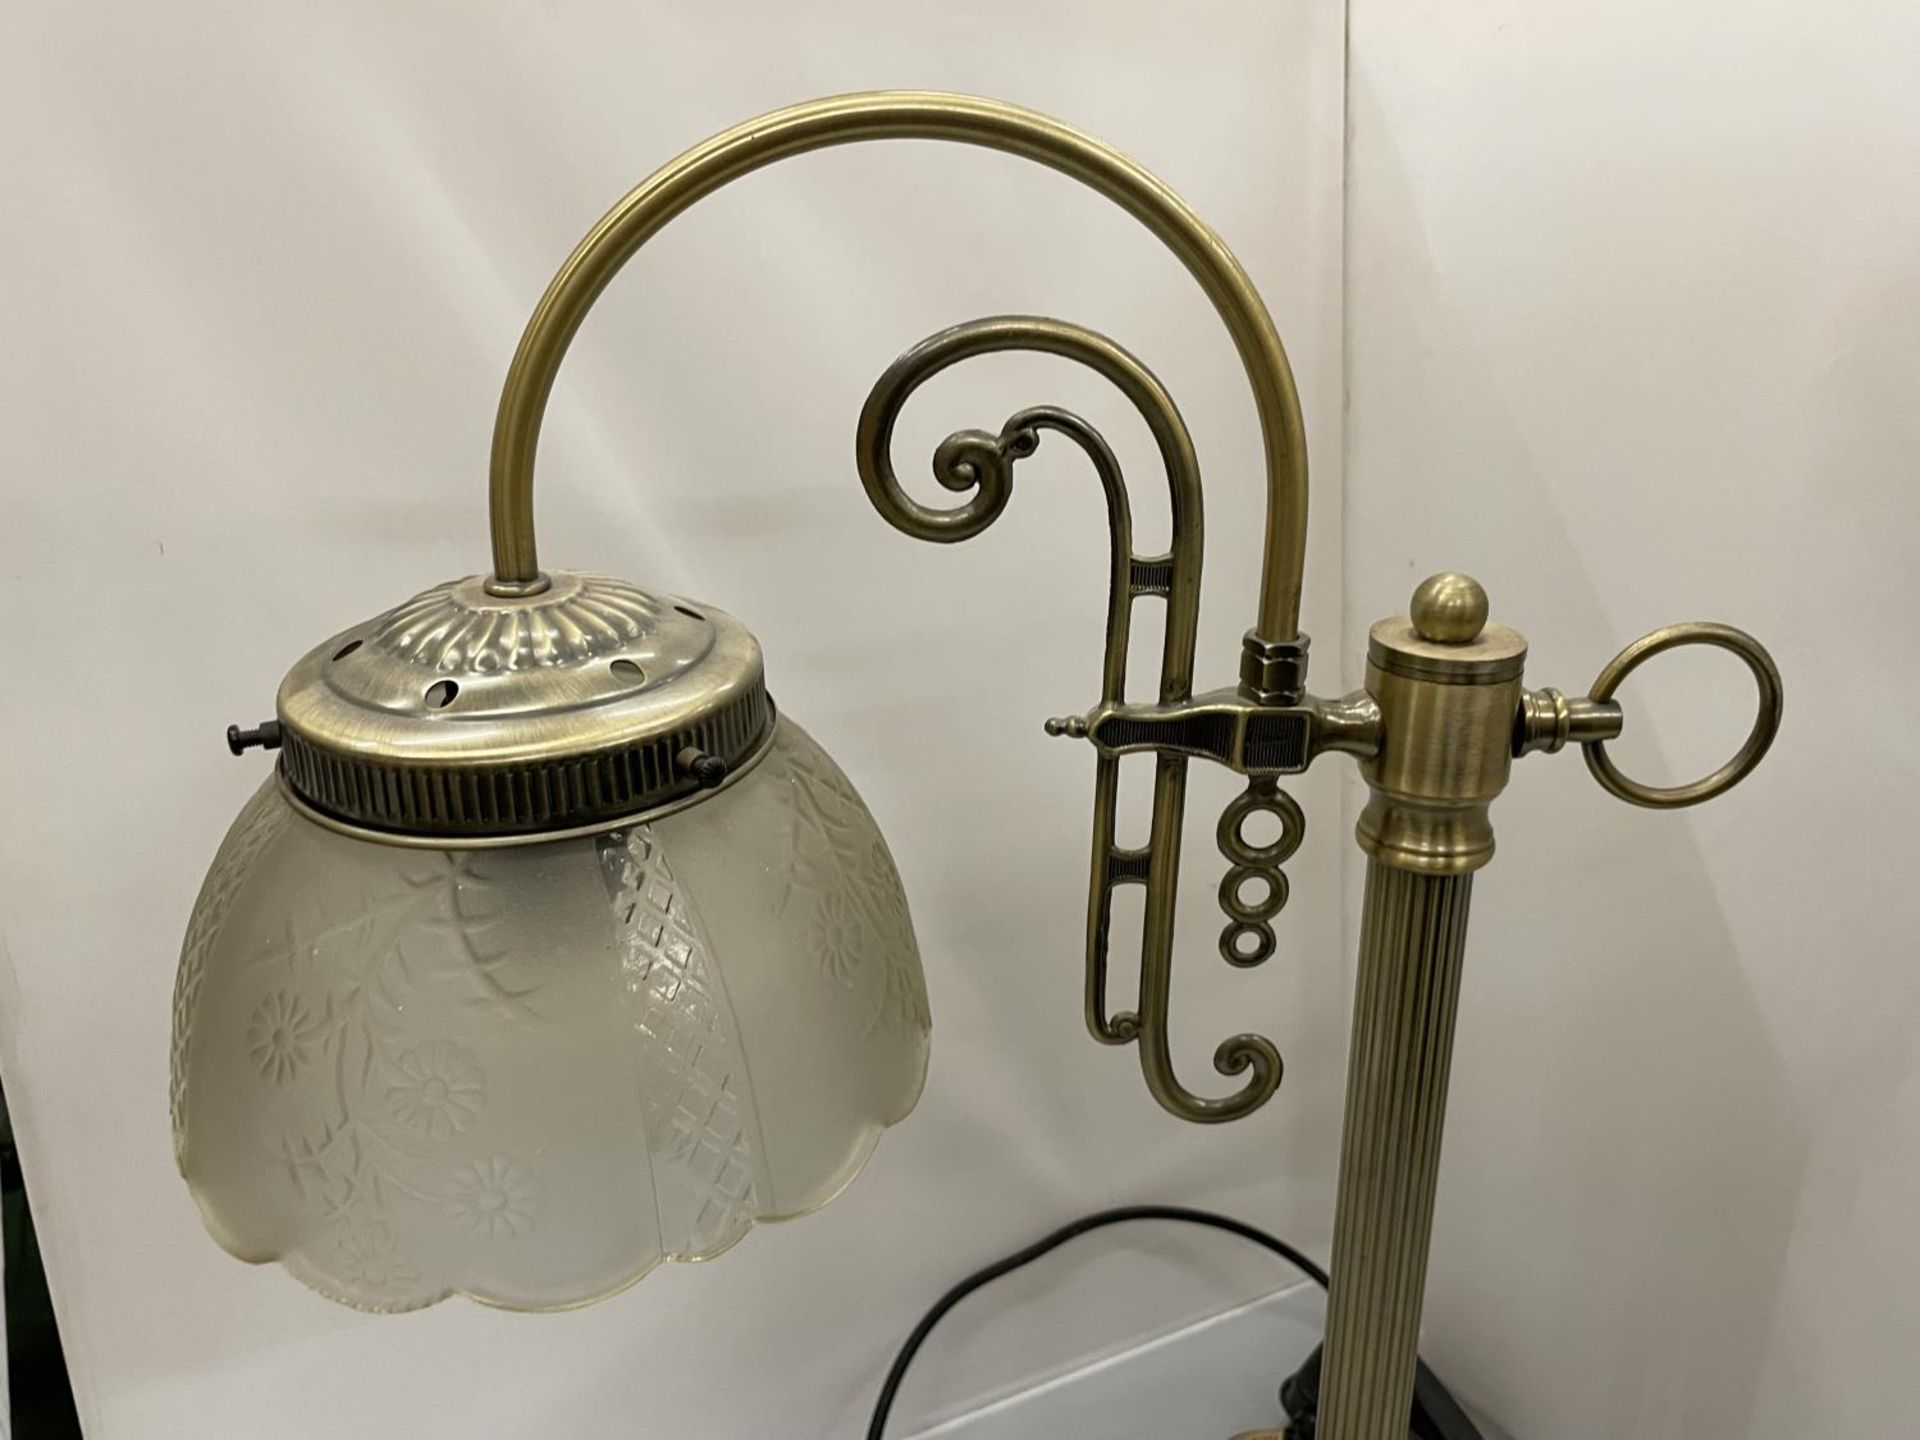 AN ANTIQUE STYLE BRASS DESK LAMP WITH GLASS SHADE - Image 2 of 4